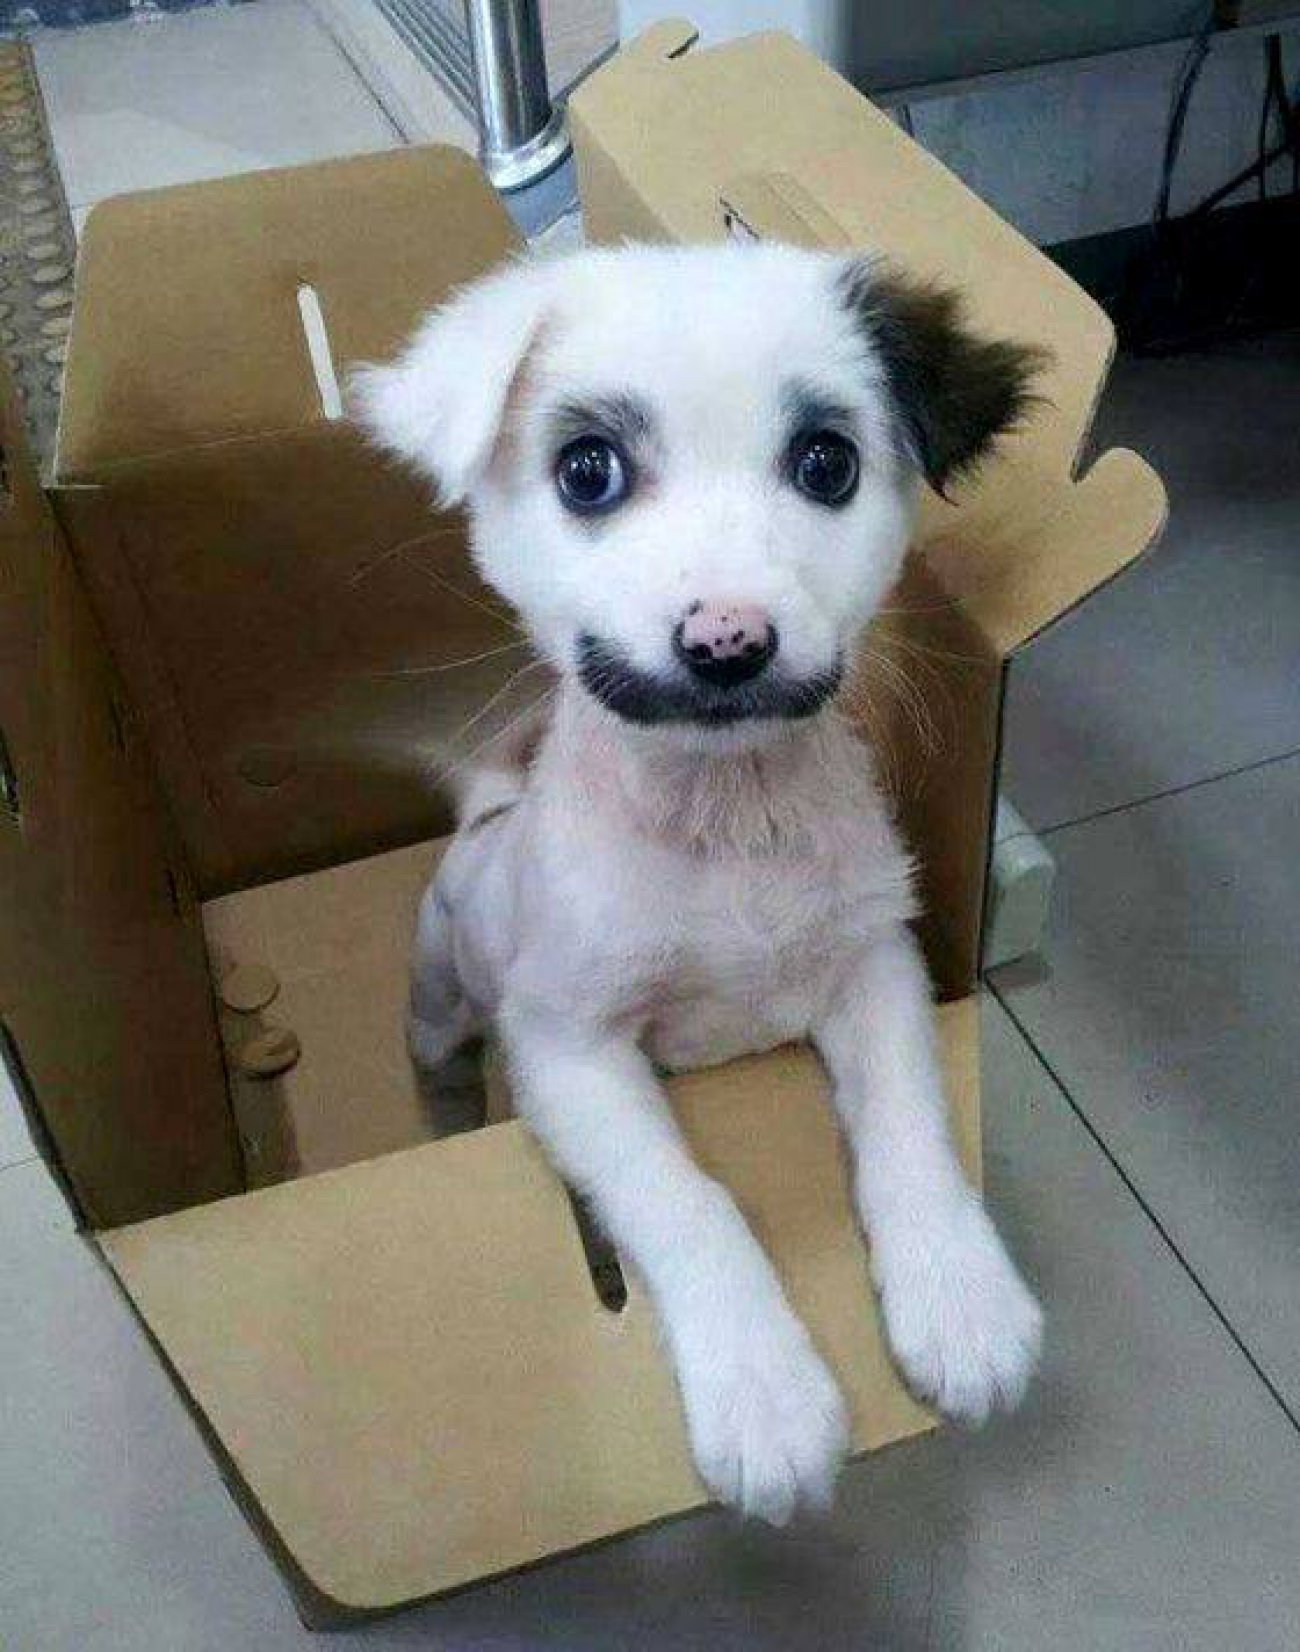 Dog with a mustache